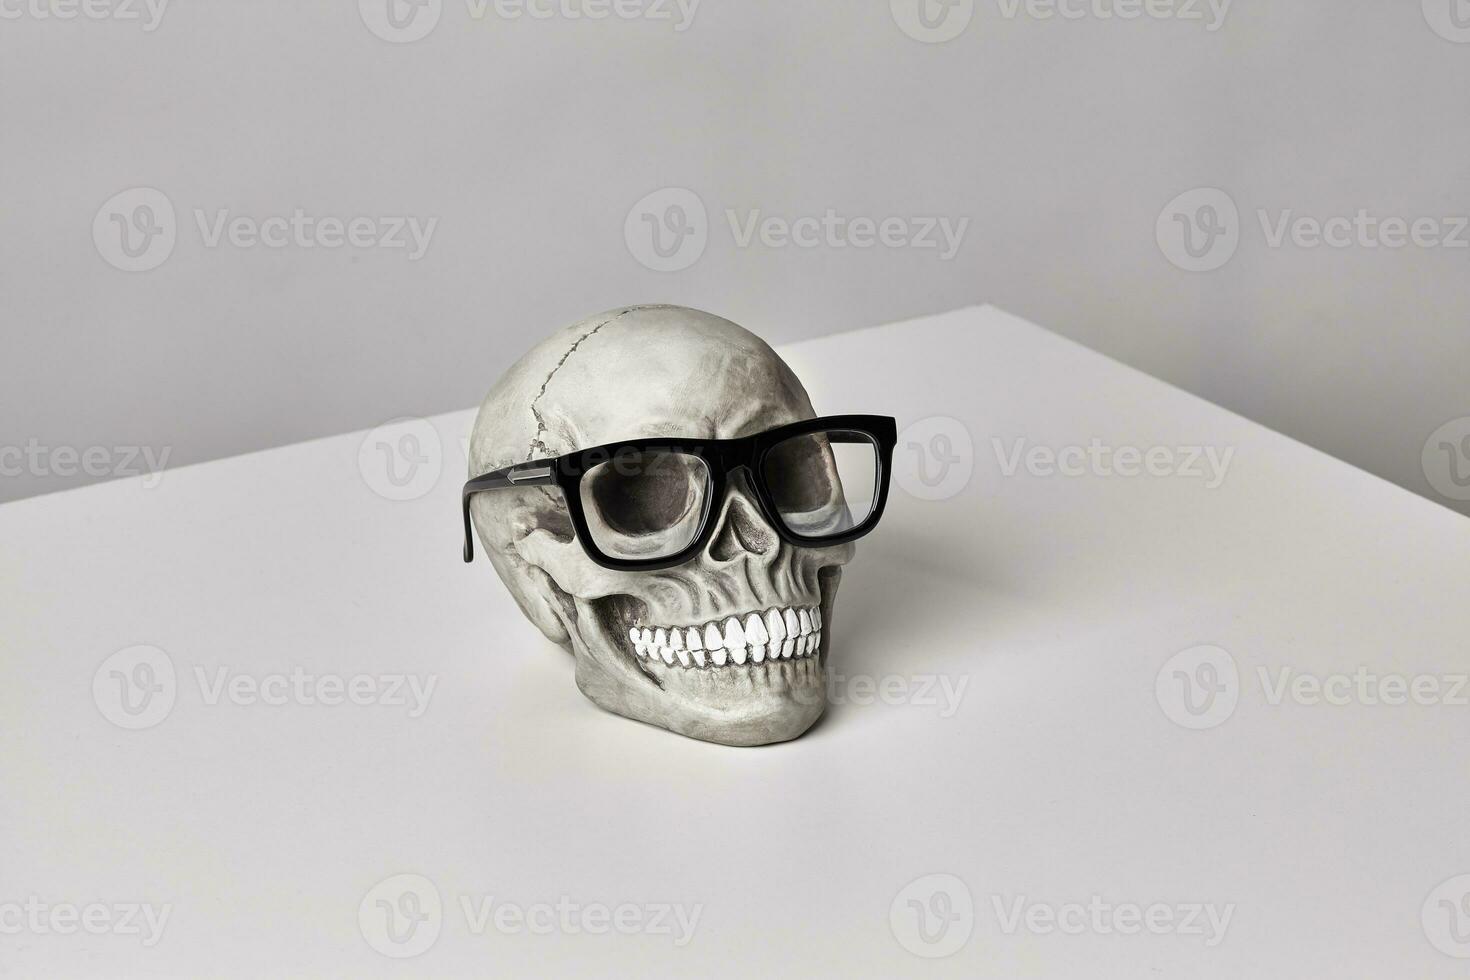 Realistic model of a human skull with teeth in a black-framed classic glasses on a light table, white background. Halloween horror concept. photo